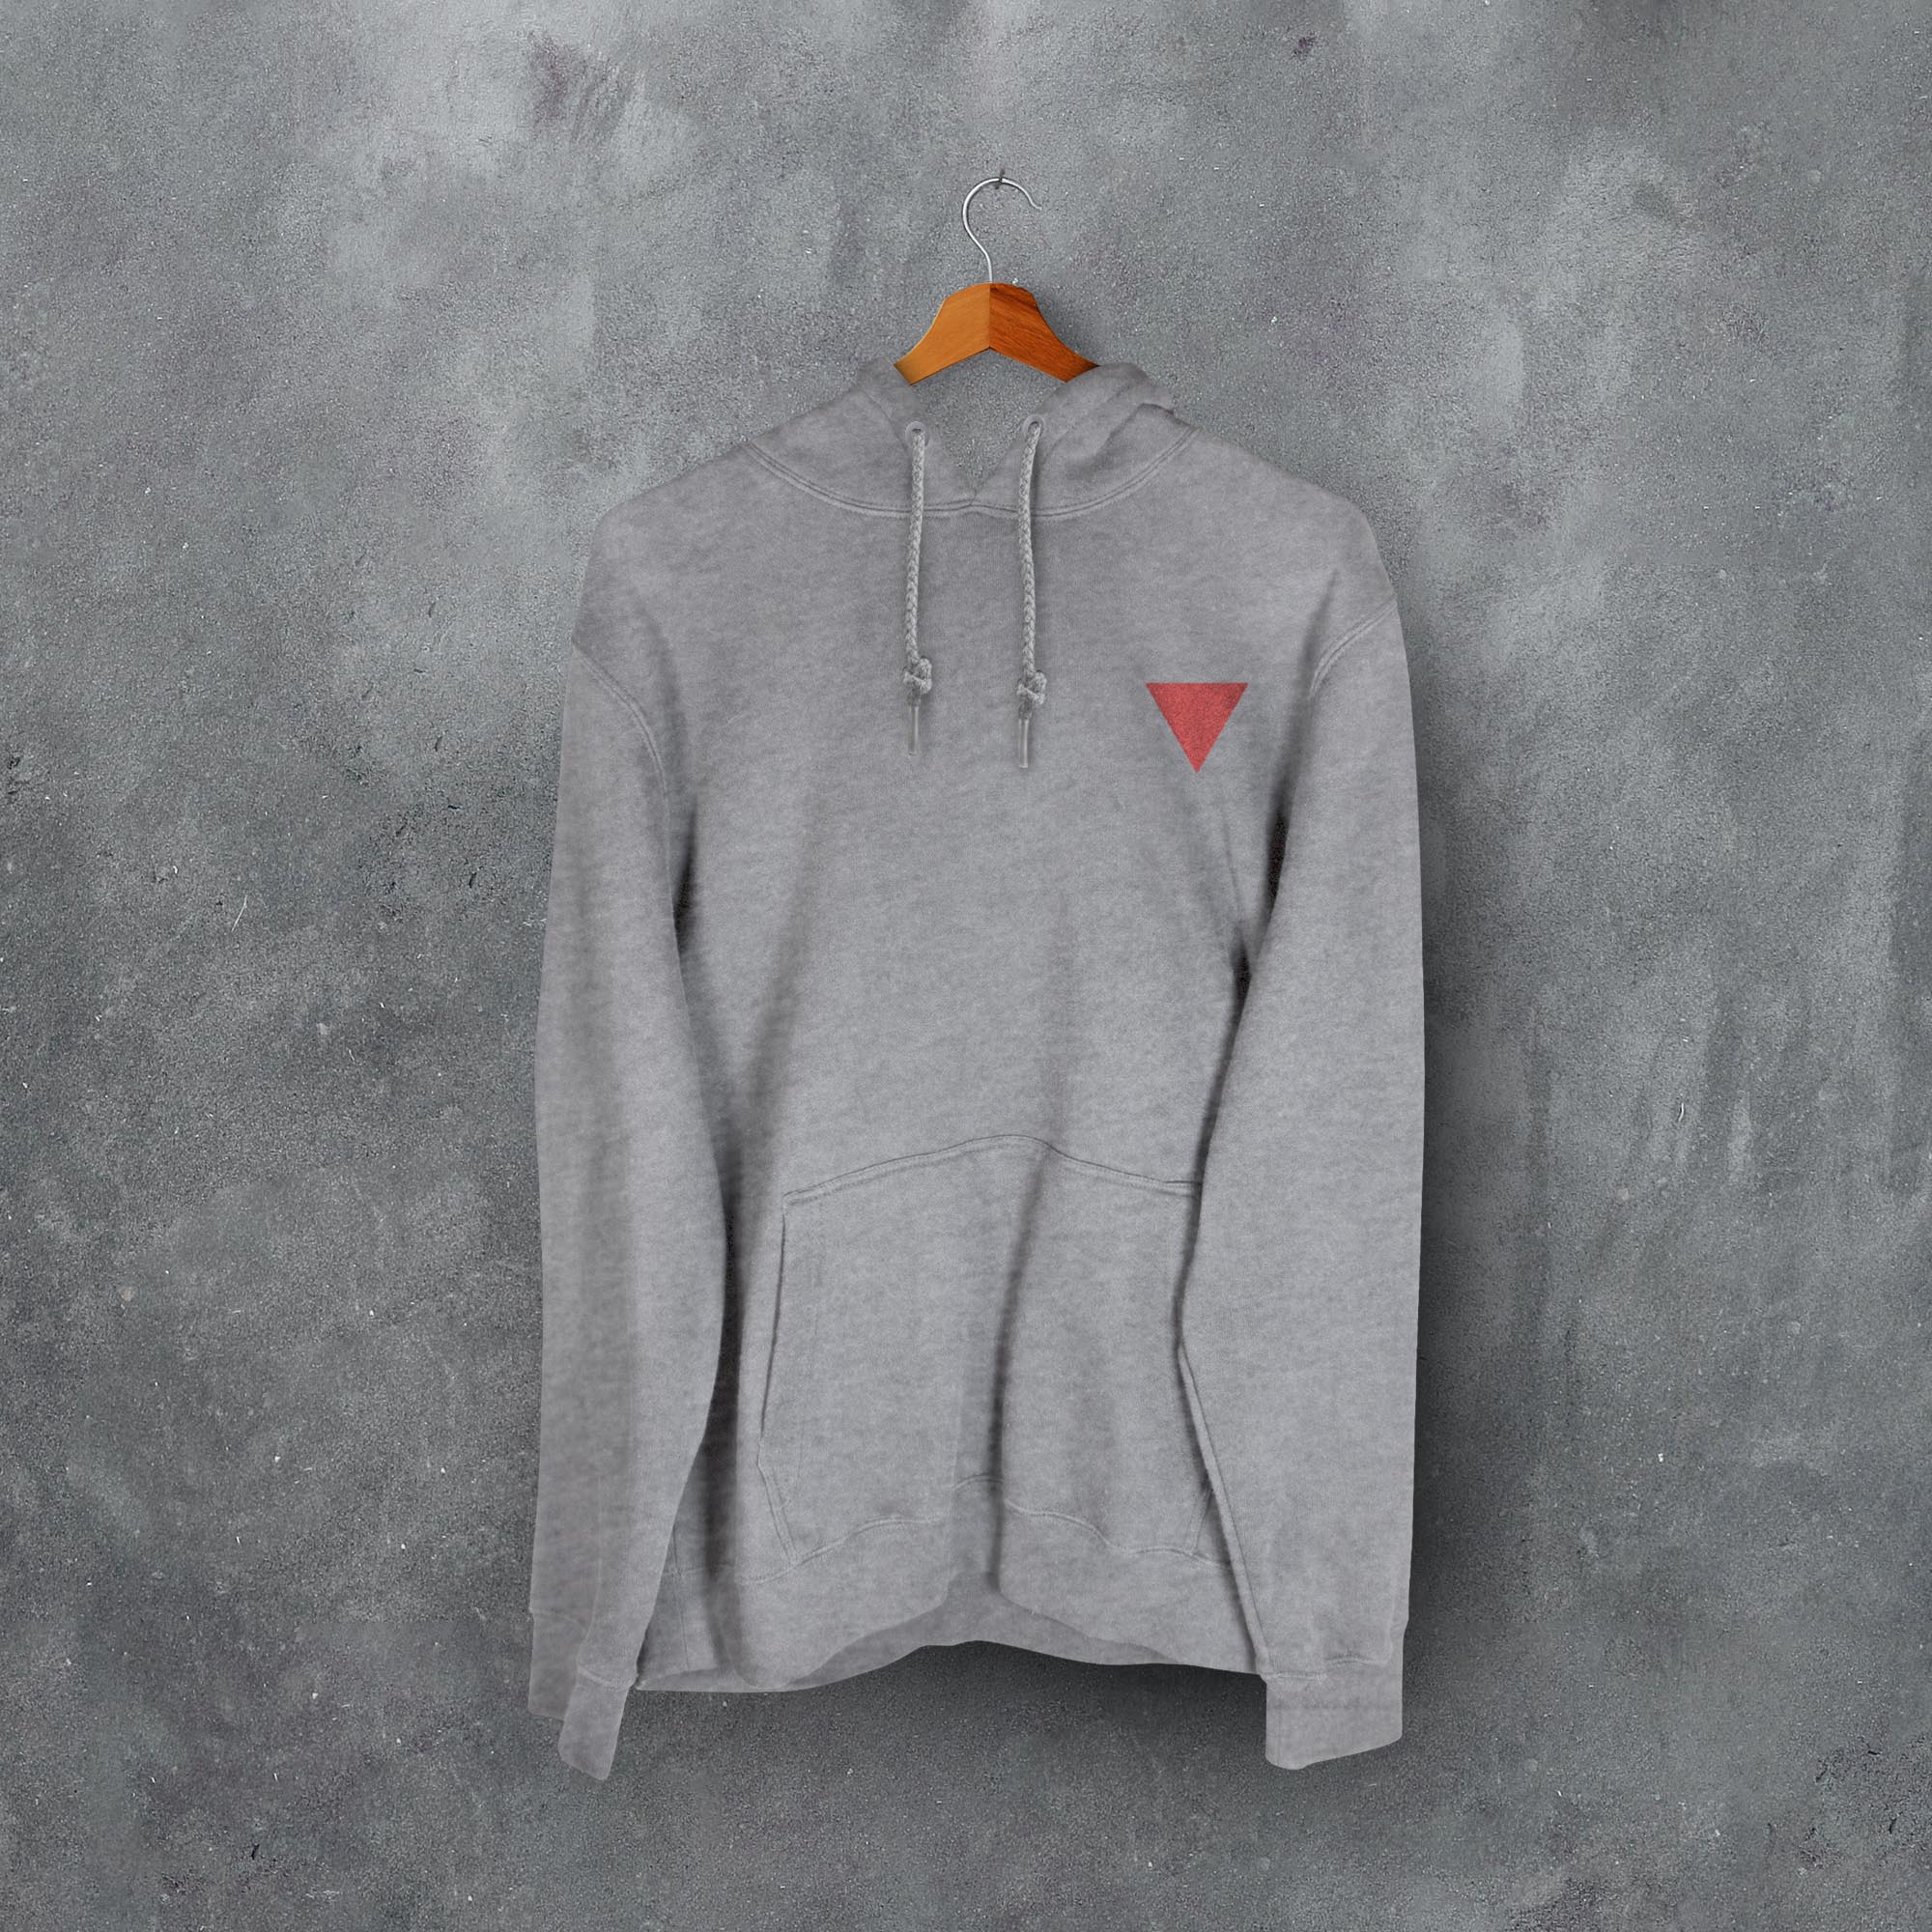 Fantasy League Football FPL 'Off The Bar' Red Arrow Hoodie Good Team On Paper